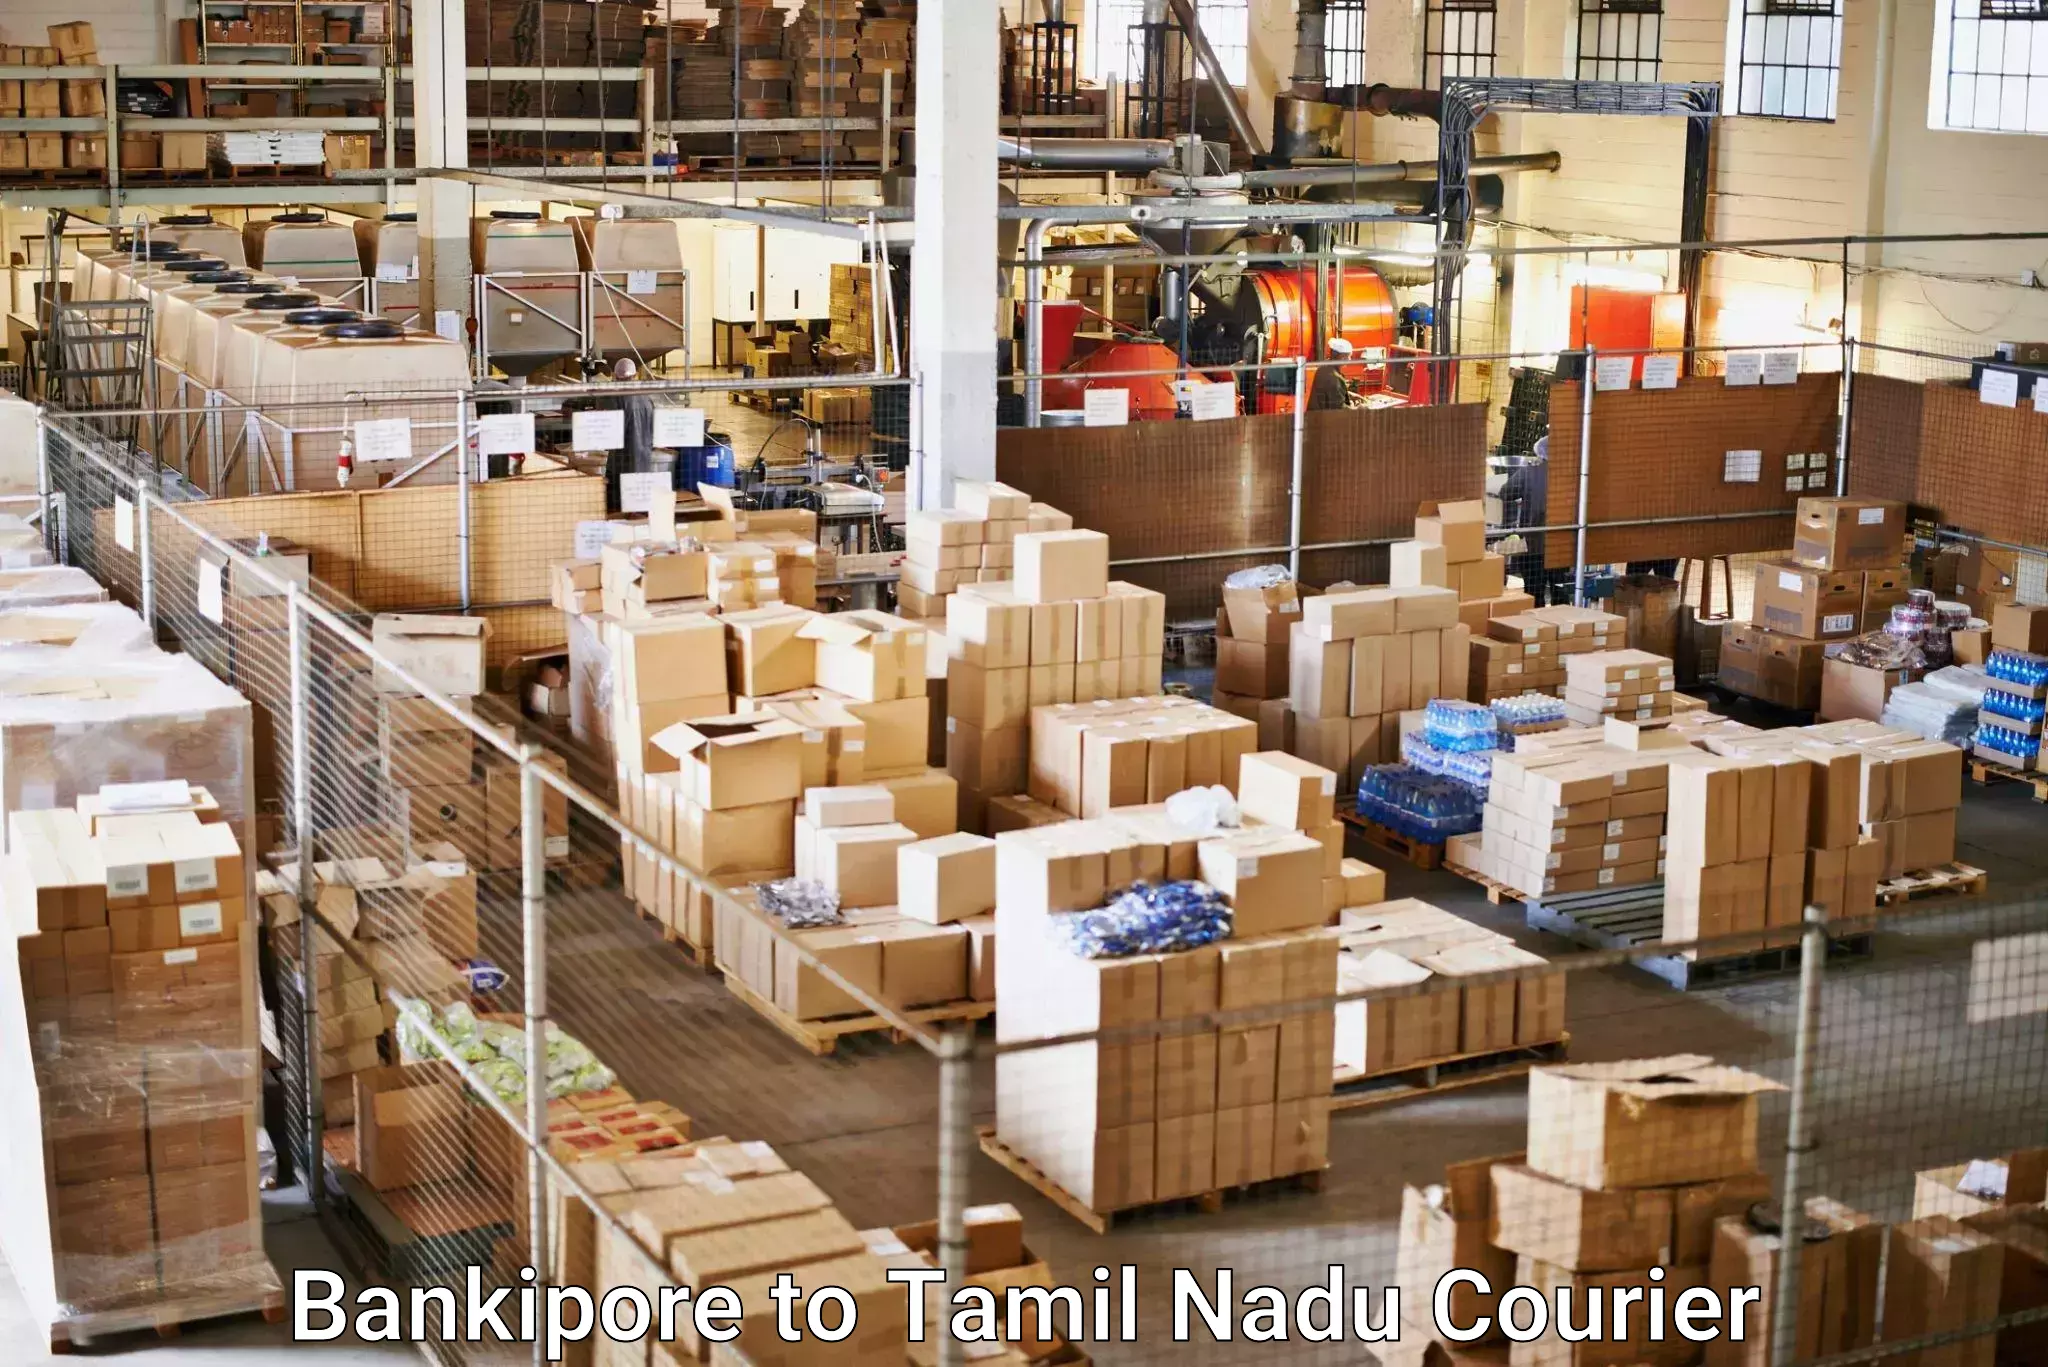 Package delivery network Bankipore to Chennai